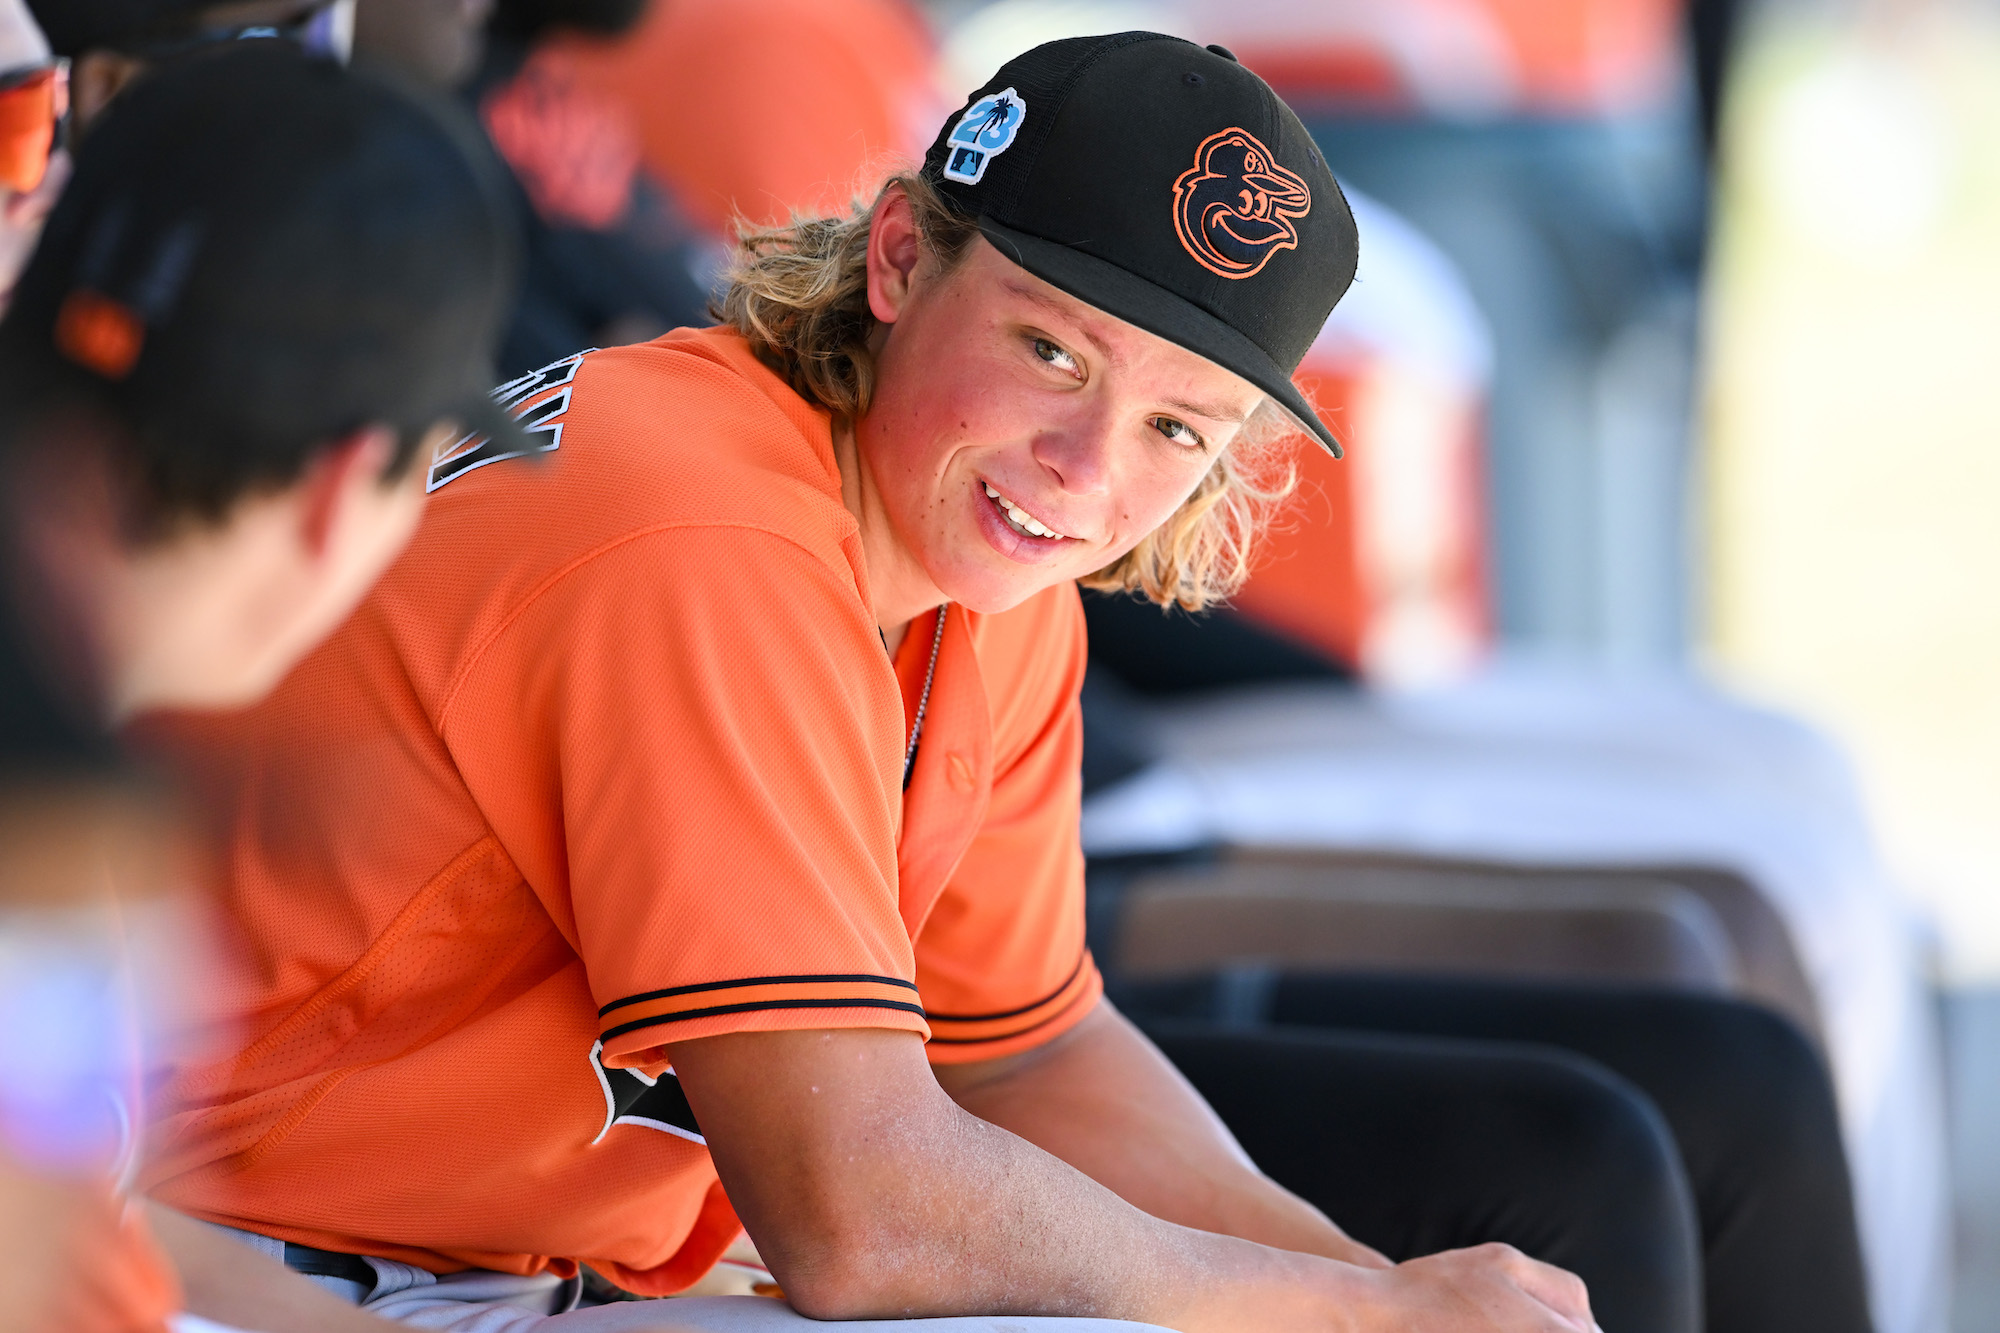 SARASOTA, FLORIDA - MARCH 21, 2023: Jackson Holliday #87 of the Baltimore Orioles looks on during a minor league spring training game against the Atlanta Braves at the Buck O’Neil Baseball Complex on March 21, 2023 in Sarasota, Florida. (Photo by Nick Cammett/Diamond Images via Getty Images) *** Local Caption *** Jackson Holliday